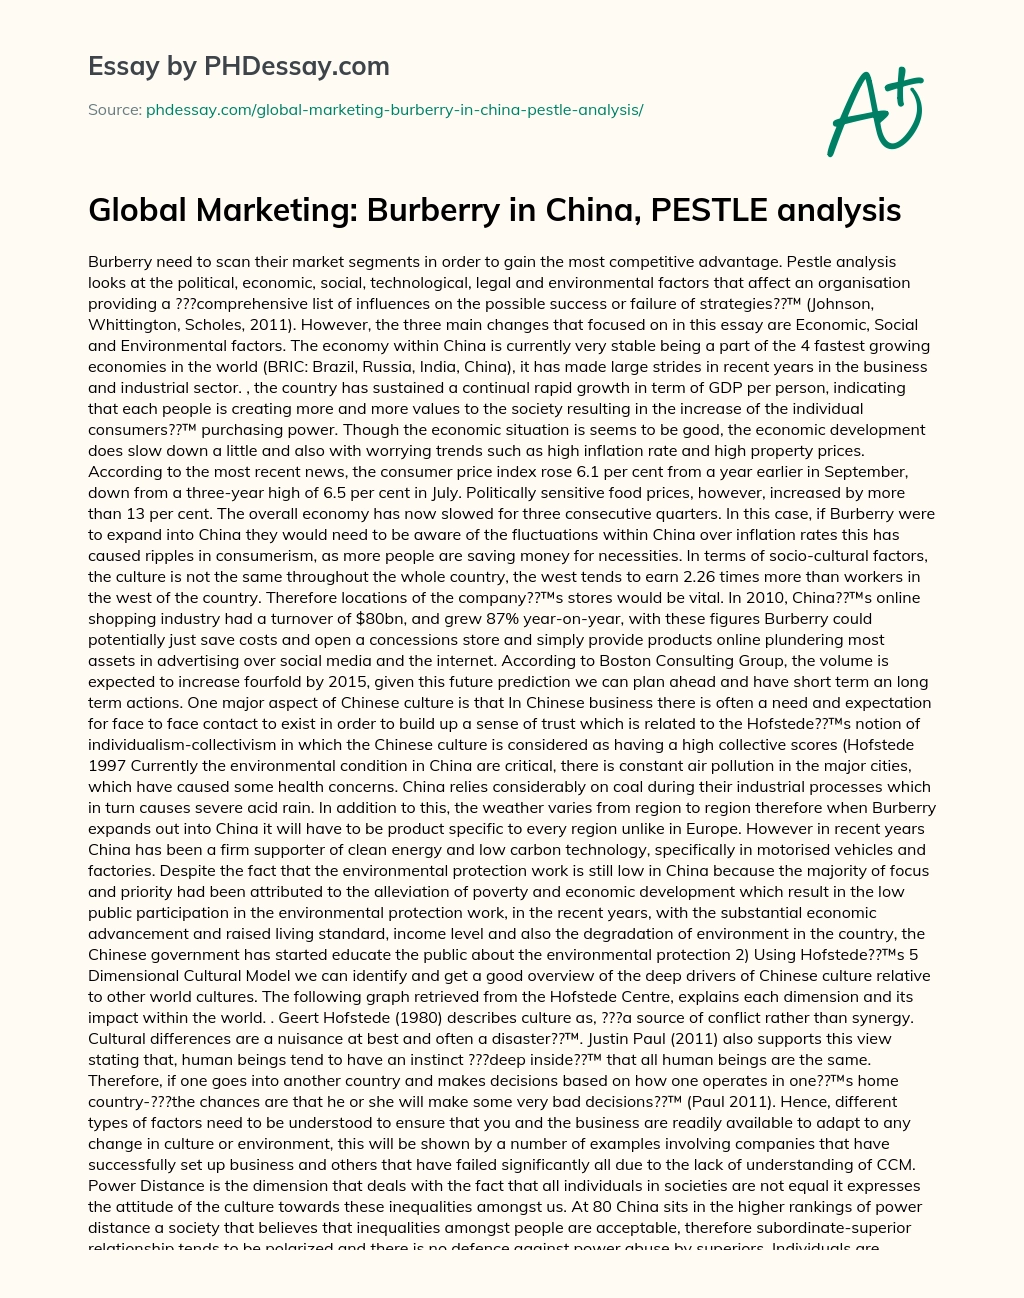 Global Marketing: Burberry in China, PESTLE analysis essay